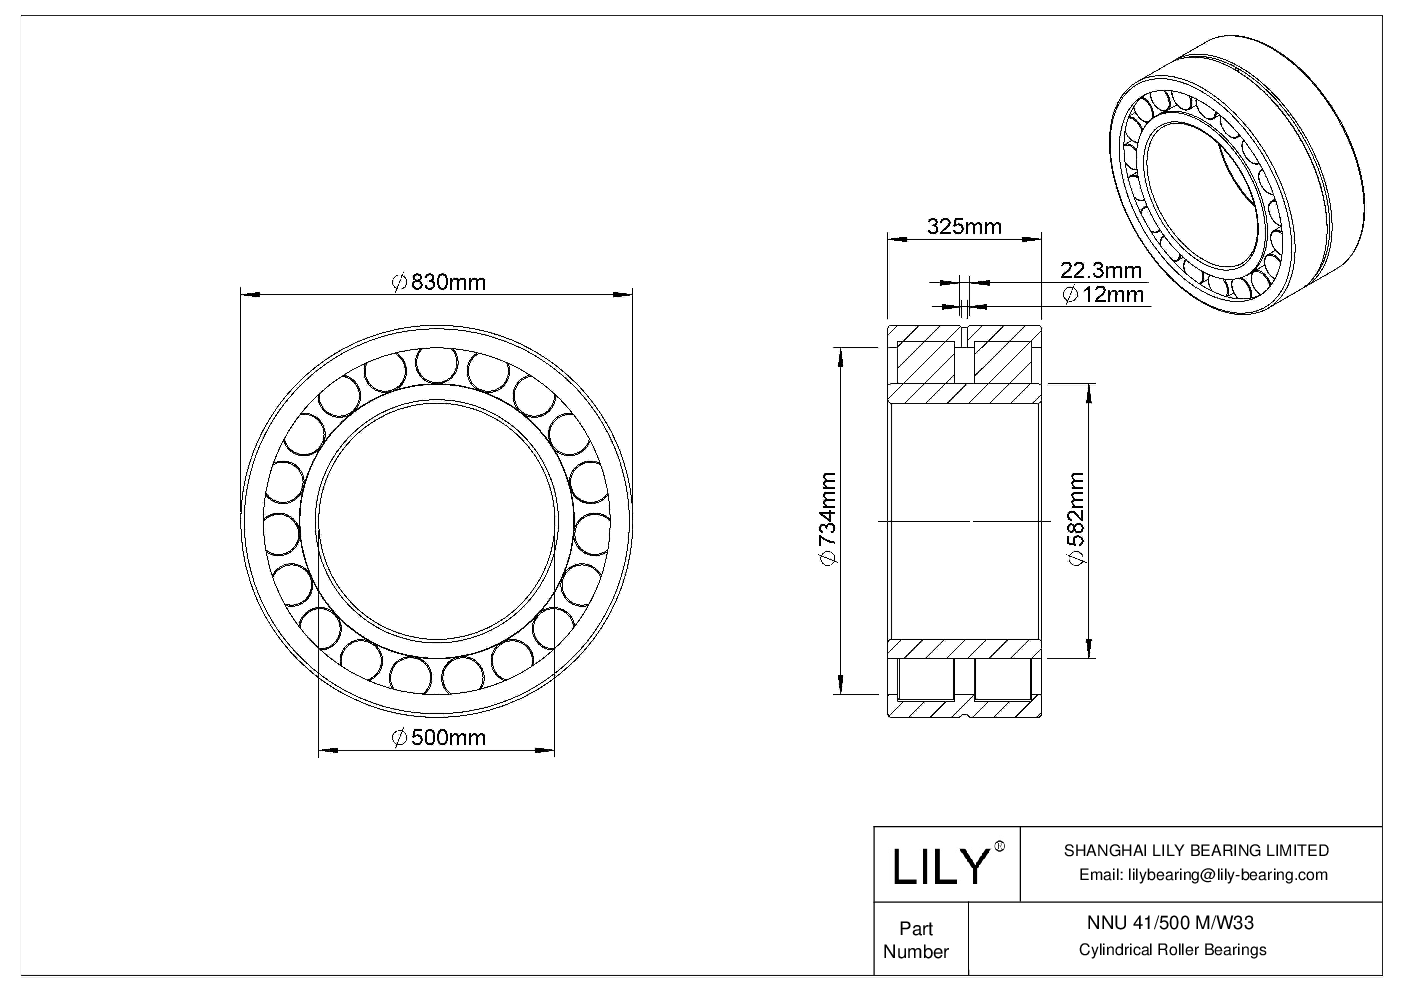 NNU 41/500 M/W33 Double Row Cylindrical Roller Bearings cad drawing